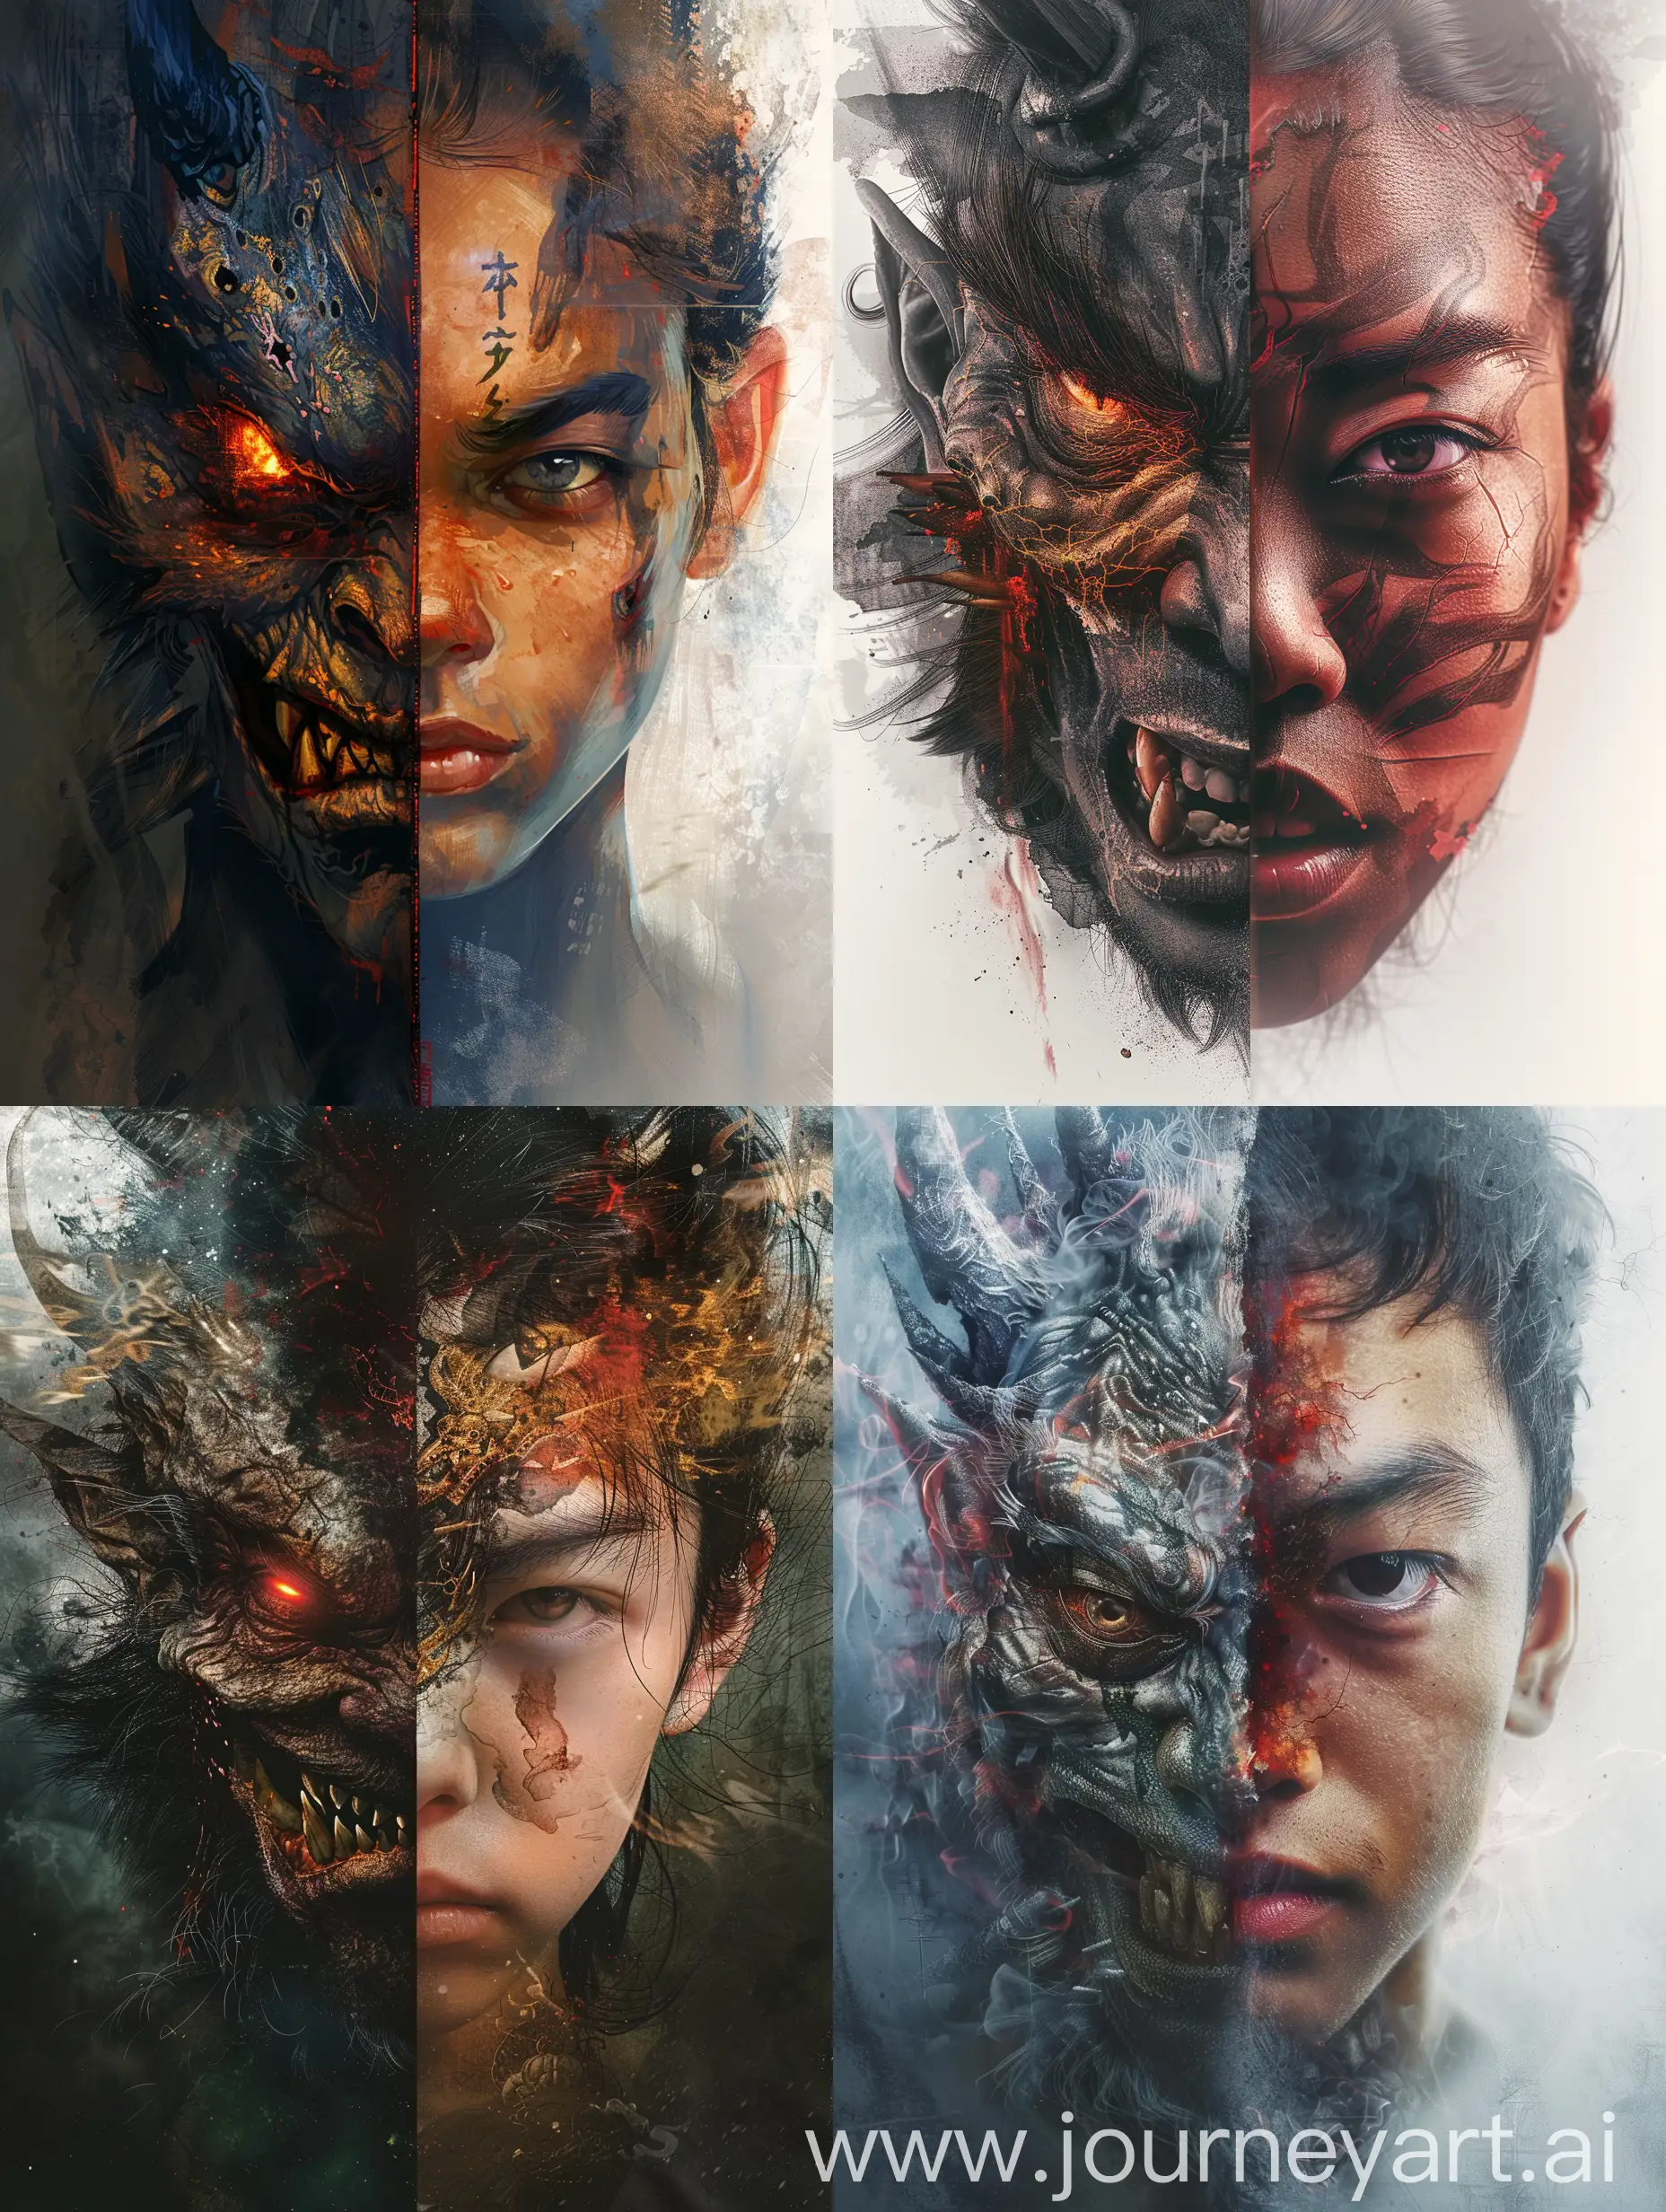 Contrasting-Human-and-Oni-Faces-Portraying-Serenity-Against-Menace